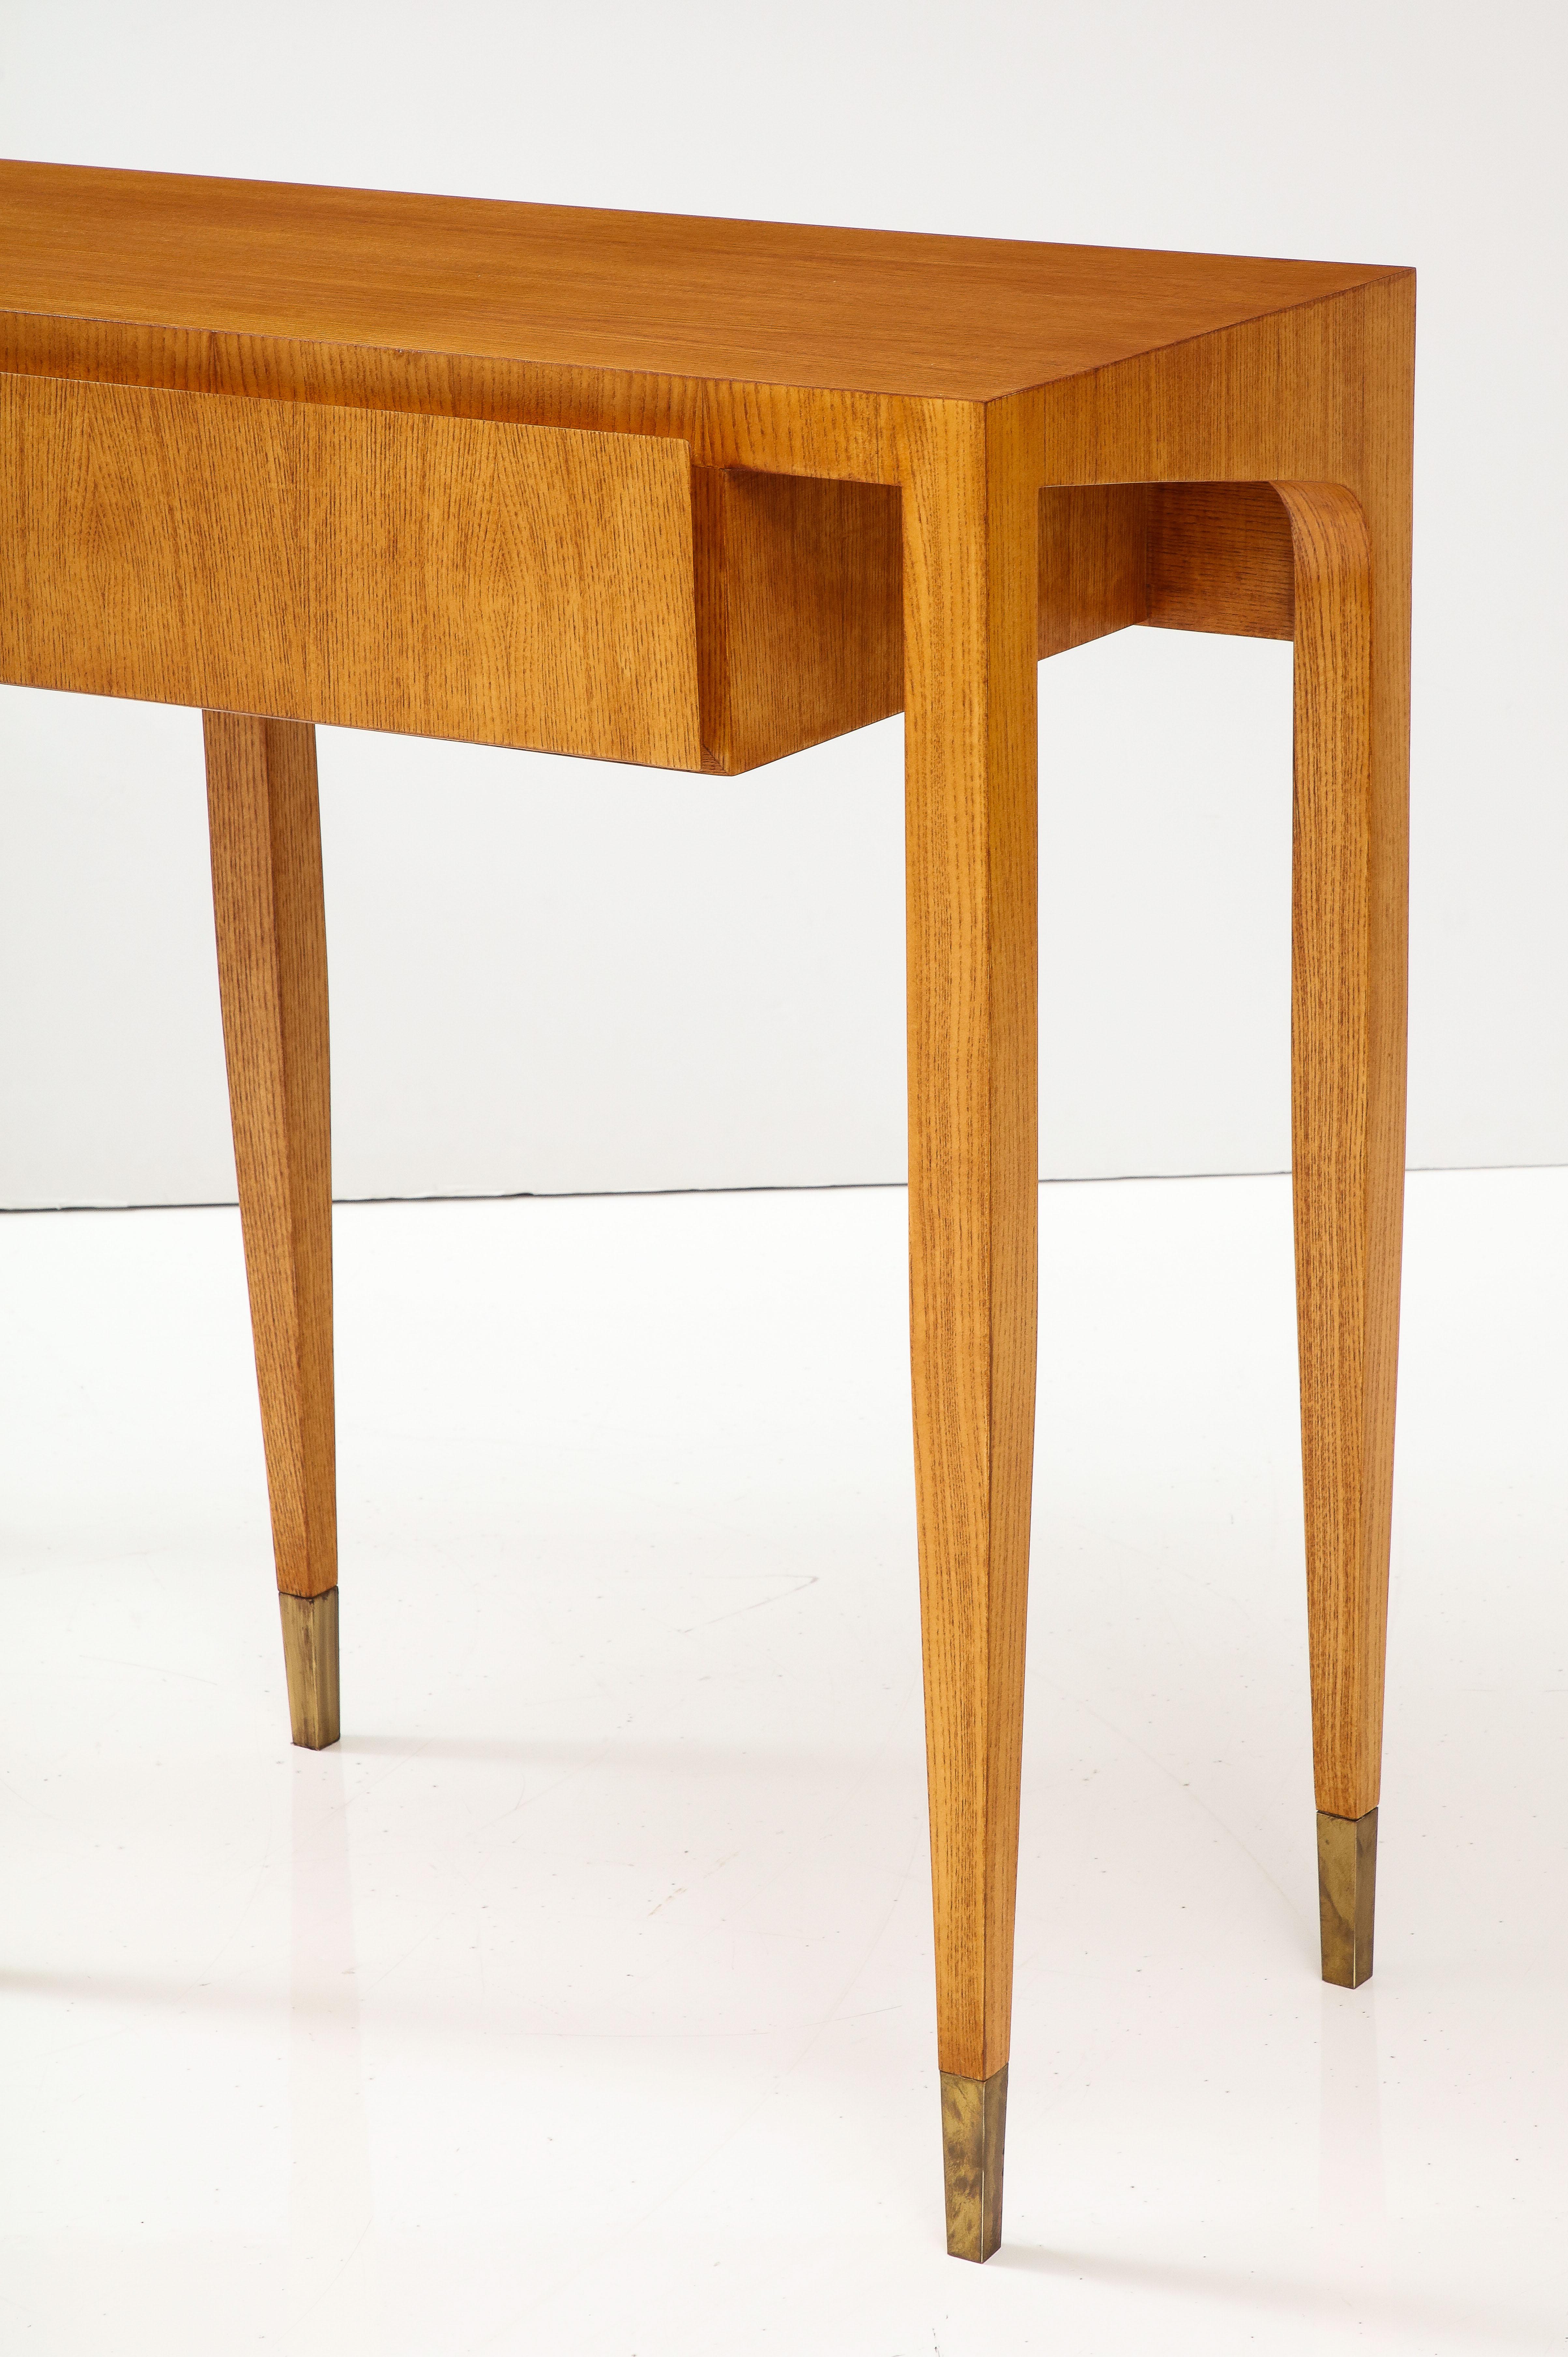 Gio Ponti for Giordano Chiesa Rare Pair of Ash Wood Consoles, Italy, 1950s For Sale 2